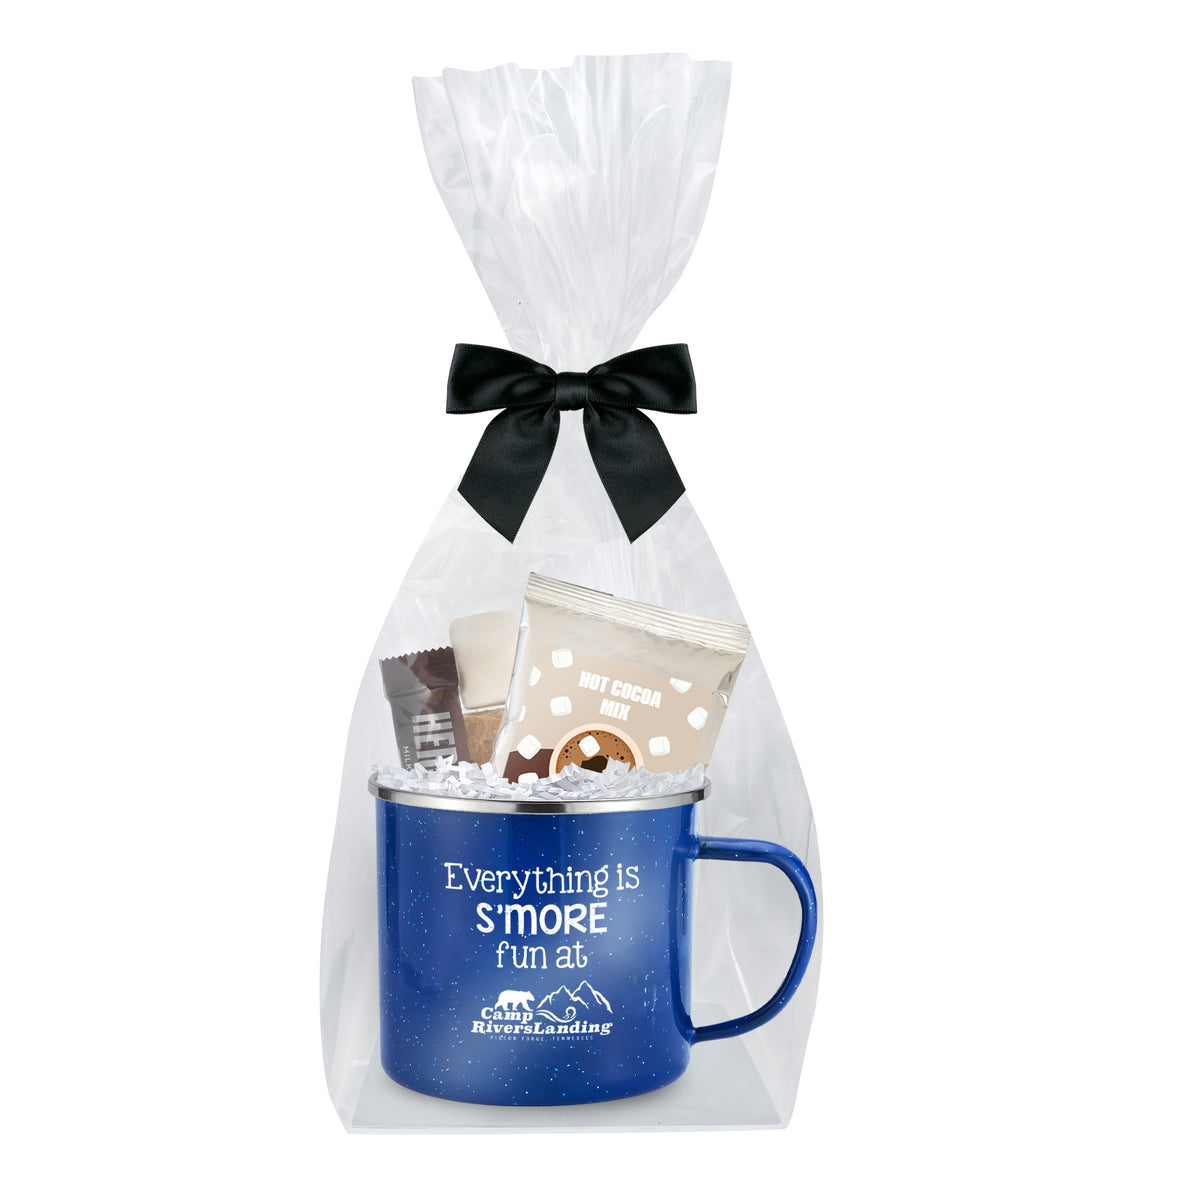 Speckled Camping Mug - 16 oz., Deluxe Cocoa &amp; Smores Gift Set